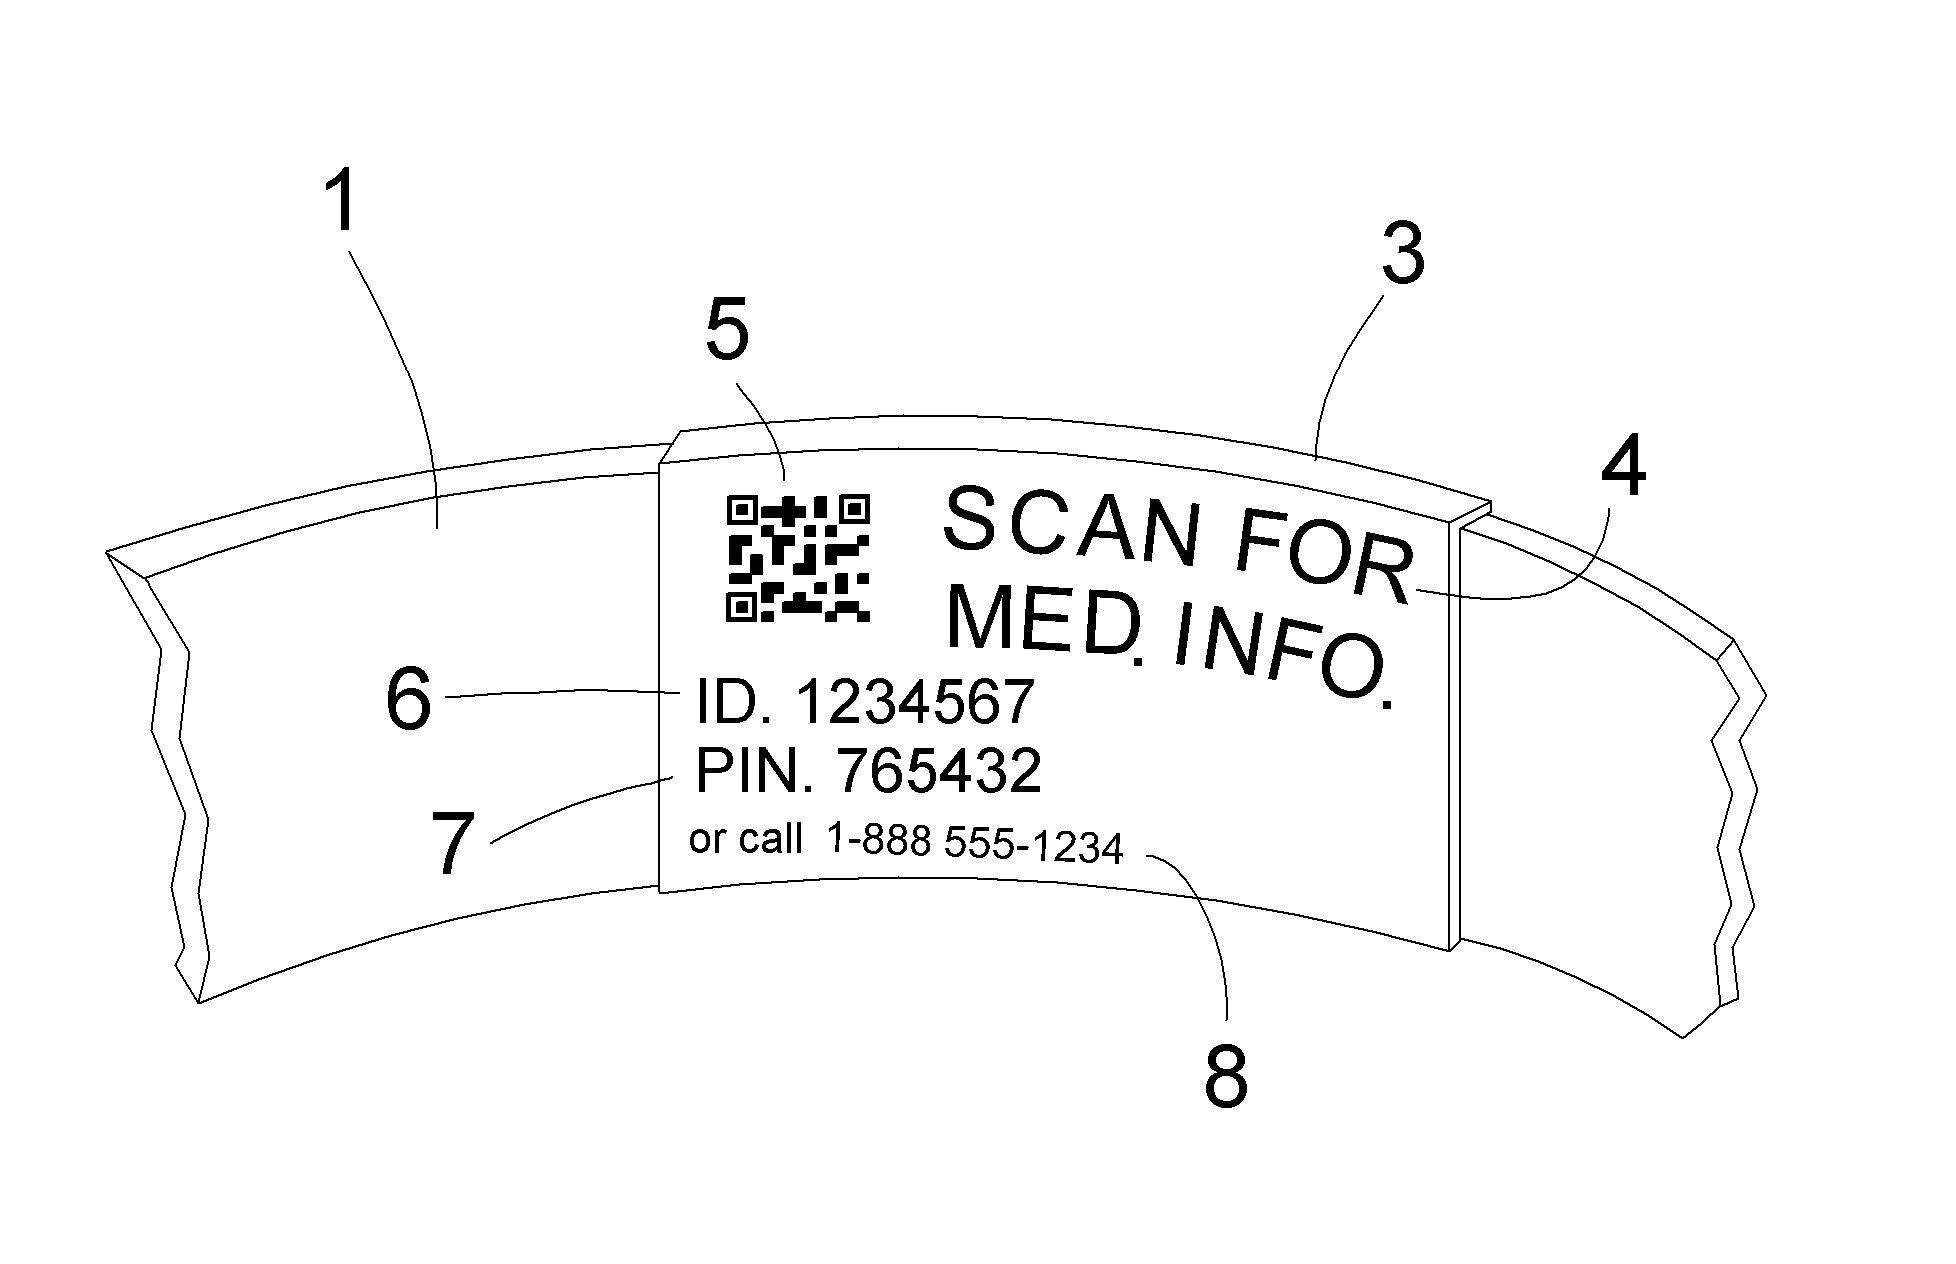 System and Method for Quickly Obtaining Medical Information